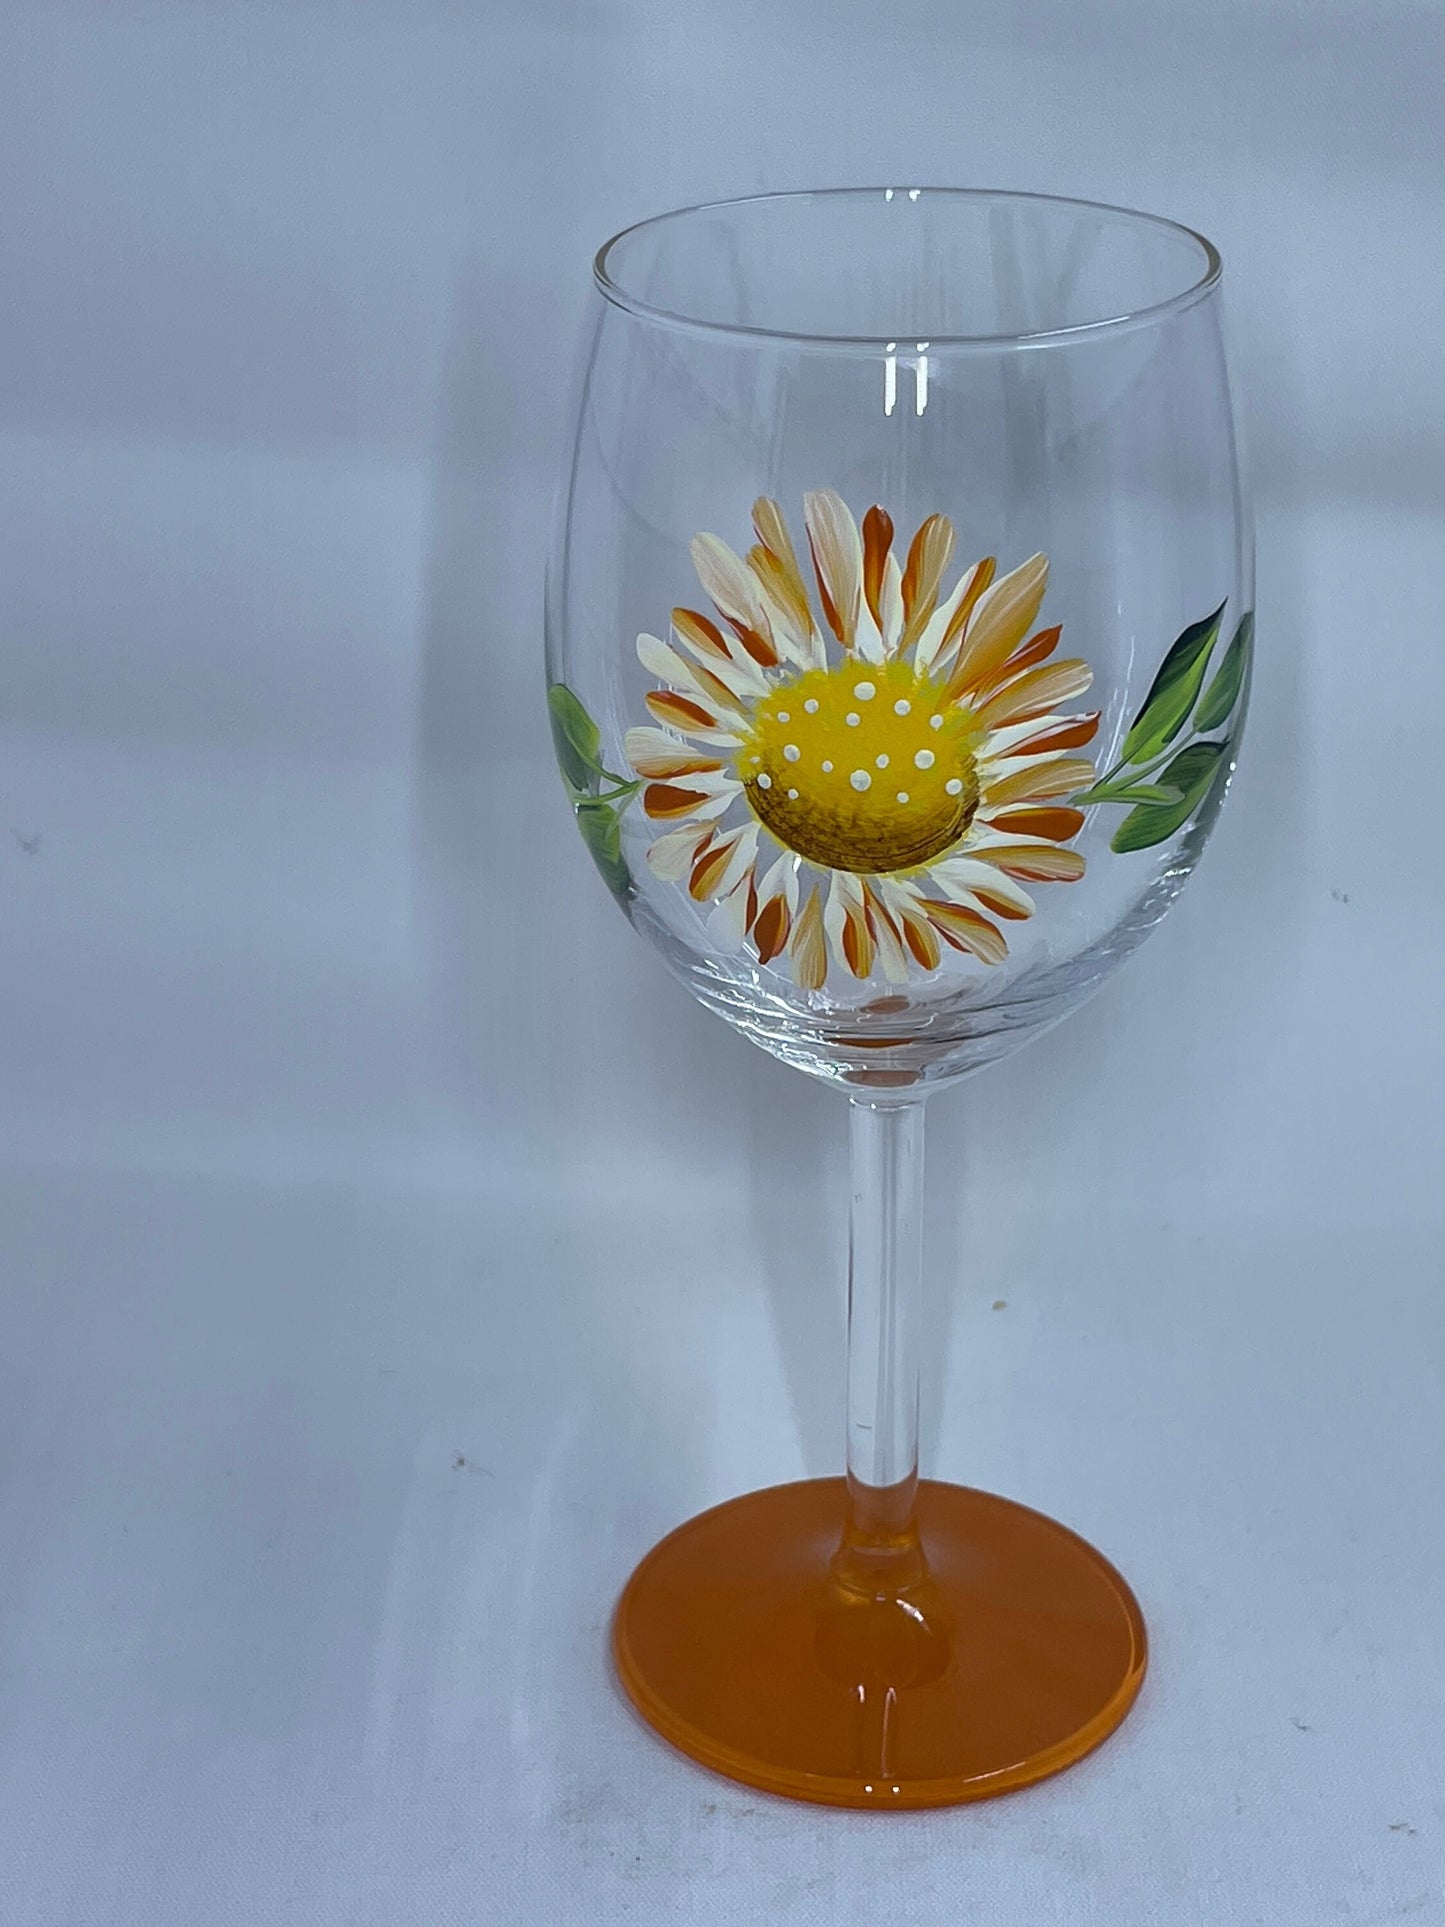 Spring Flower Wine Glasses in your choice of four colors Hand Painted flower wine glasses